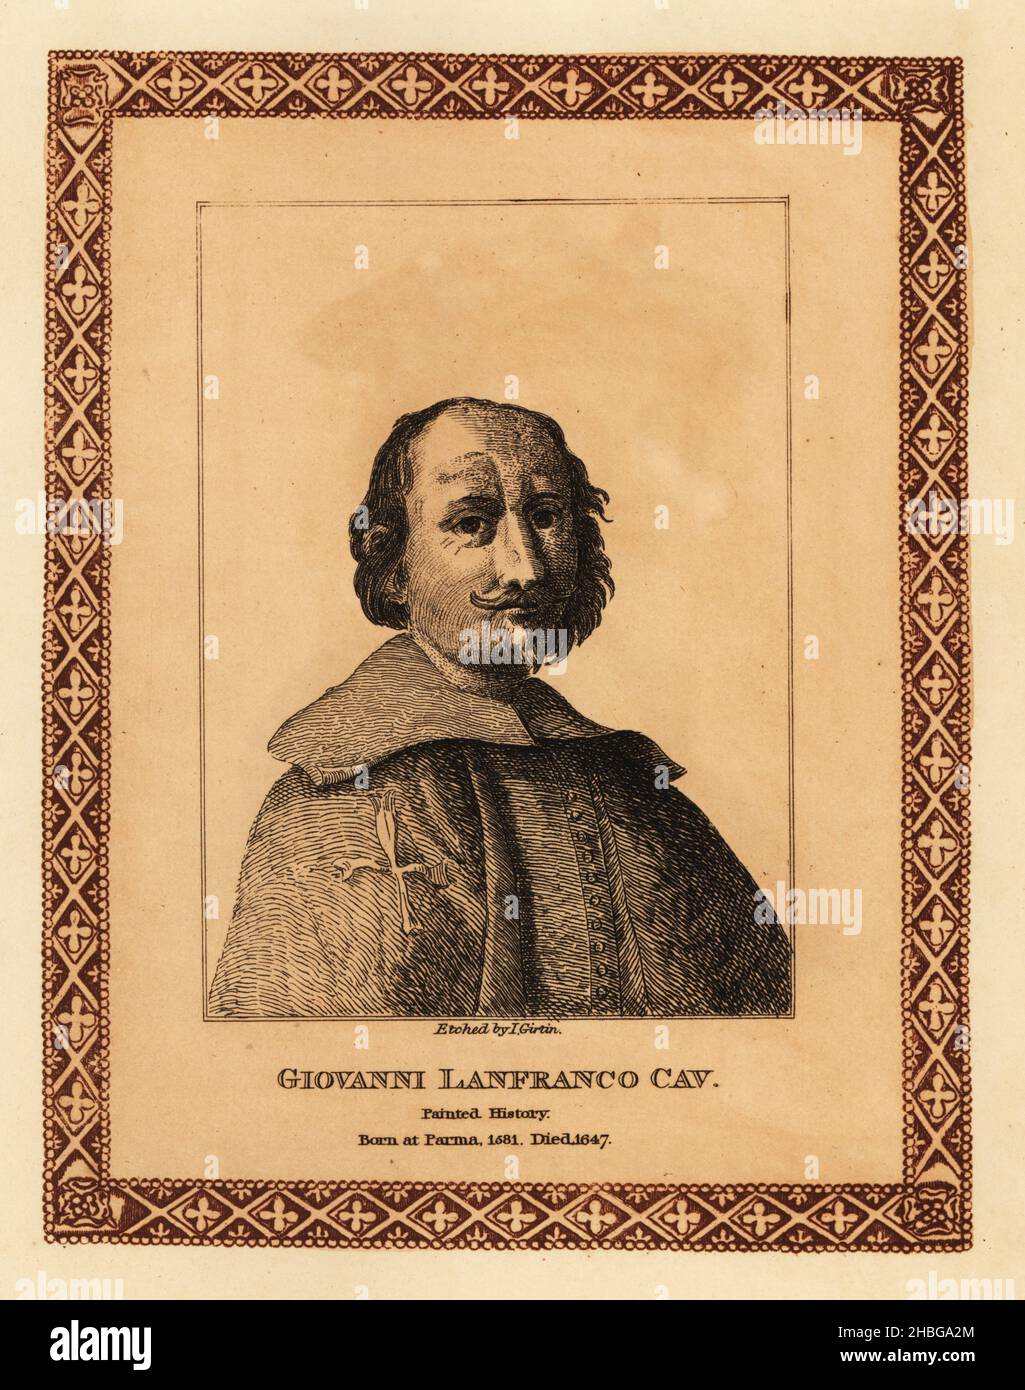 Giovanni Lanfranco, 1582-1647, Italian history painter of the Baroque period. Il cavaliere Giovanni. Giovanni Lanfranco Cav. Tinted etching within a decorative border by John Girtin after a self-portrait by Lanfranco from John Girtin’s Seventy-Five Portraits of Celebrated Painters from Authentic Originals, J. M’Creery, London, 1817. Stock Photo